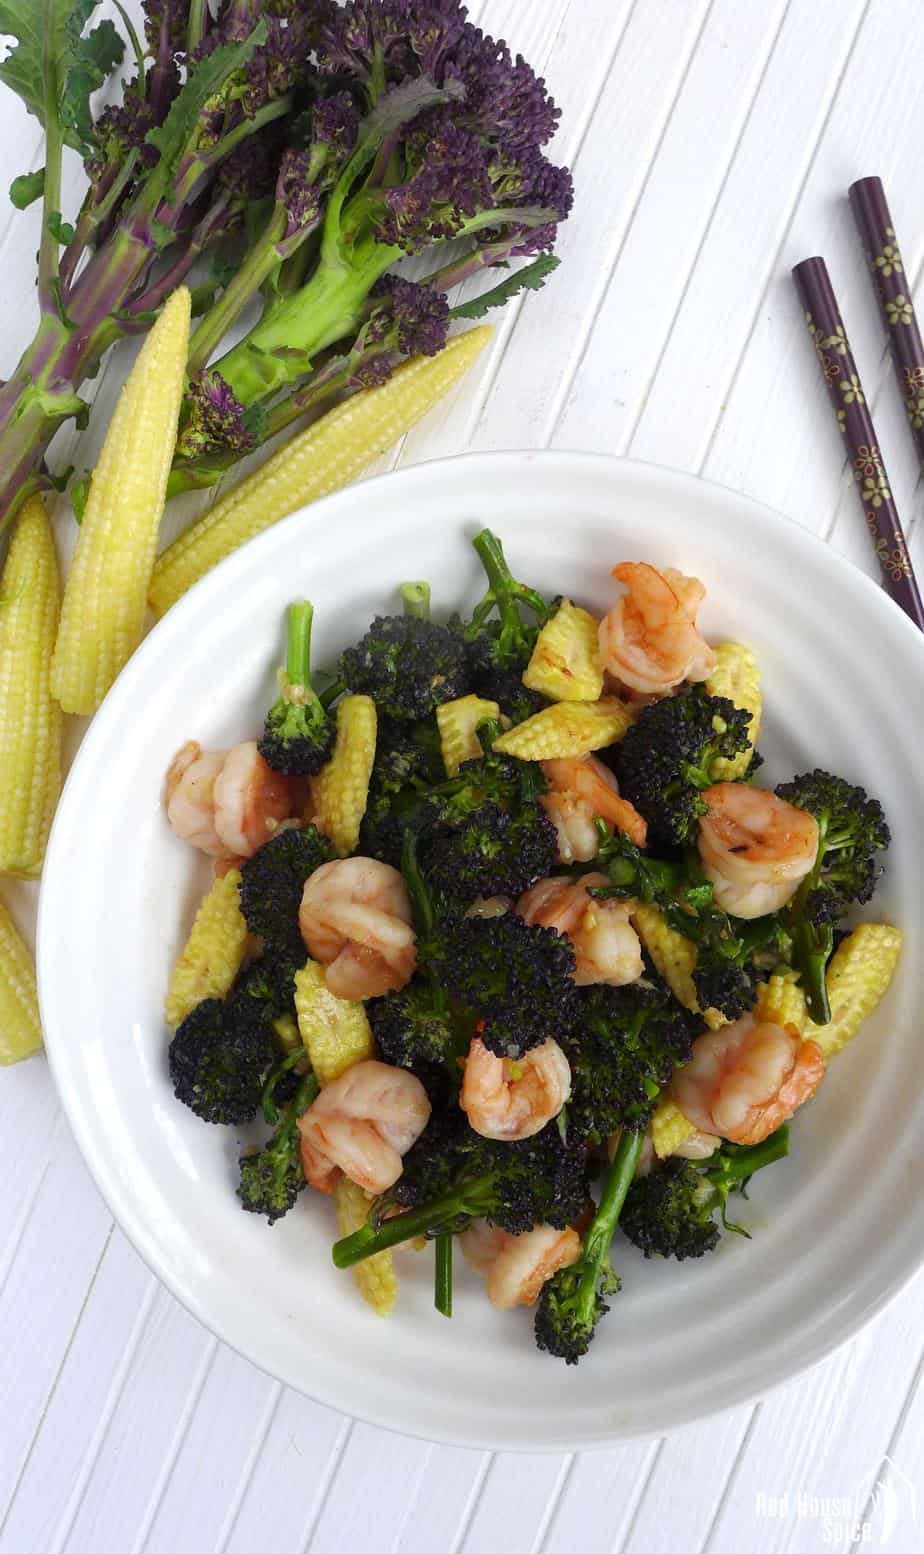 Fresh, crunchy, healthy and very easy to cook, purple sprouting broccoli and prawn stir-fry is a great seasonal dish to try.